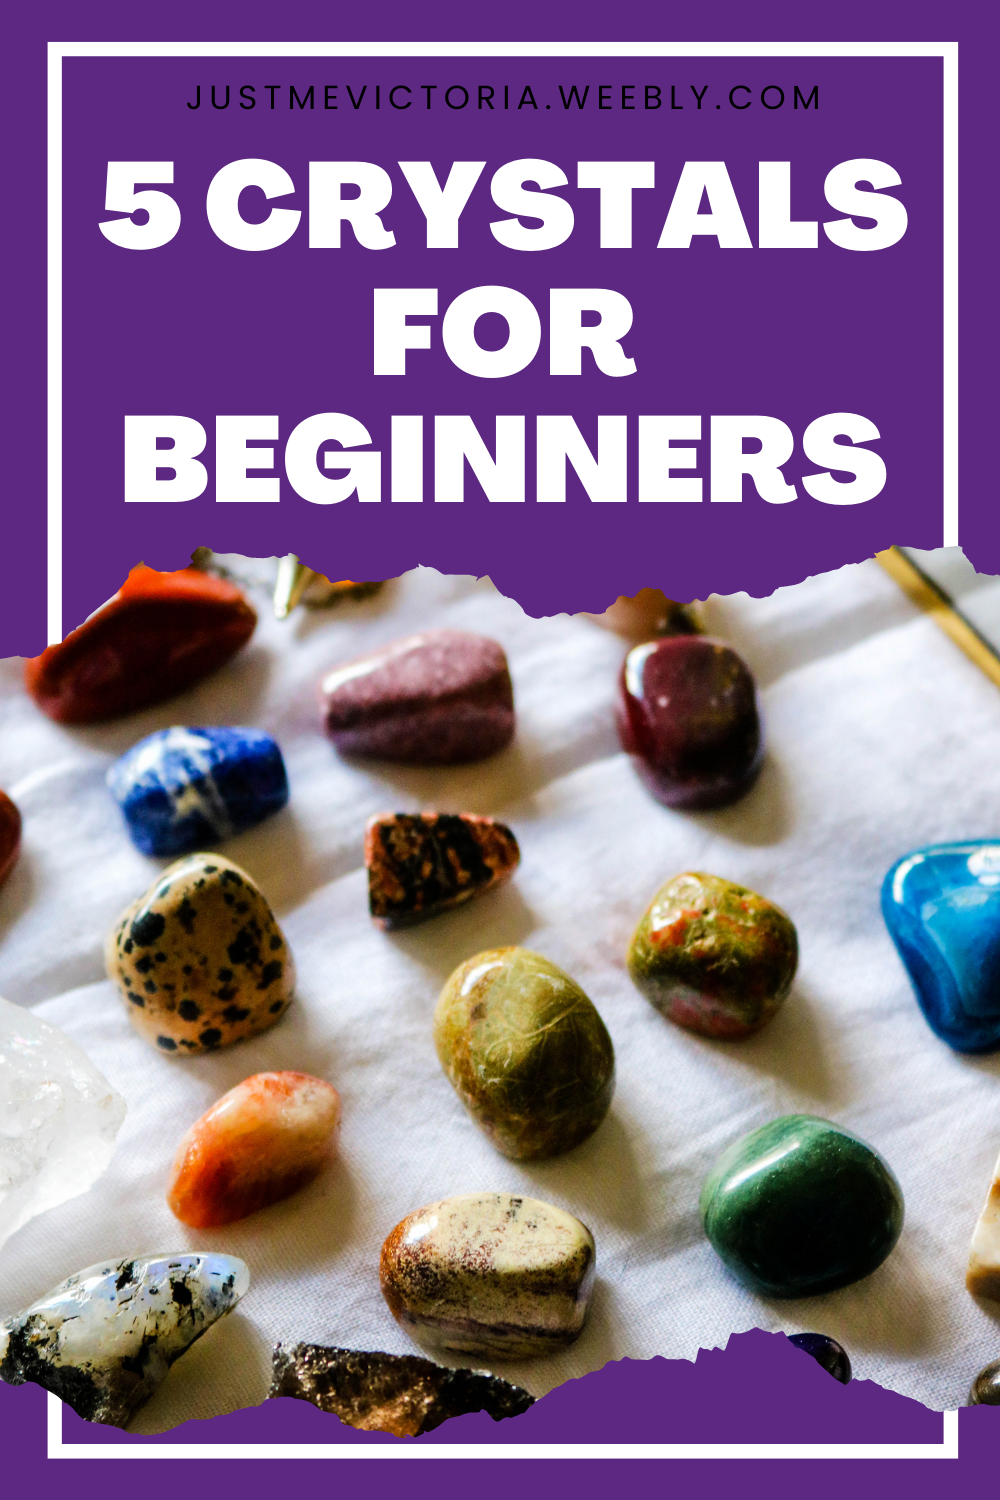 5 Cyrstals For Beginners